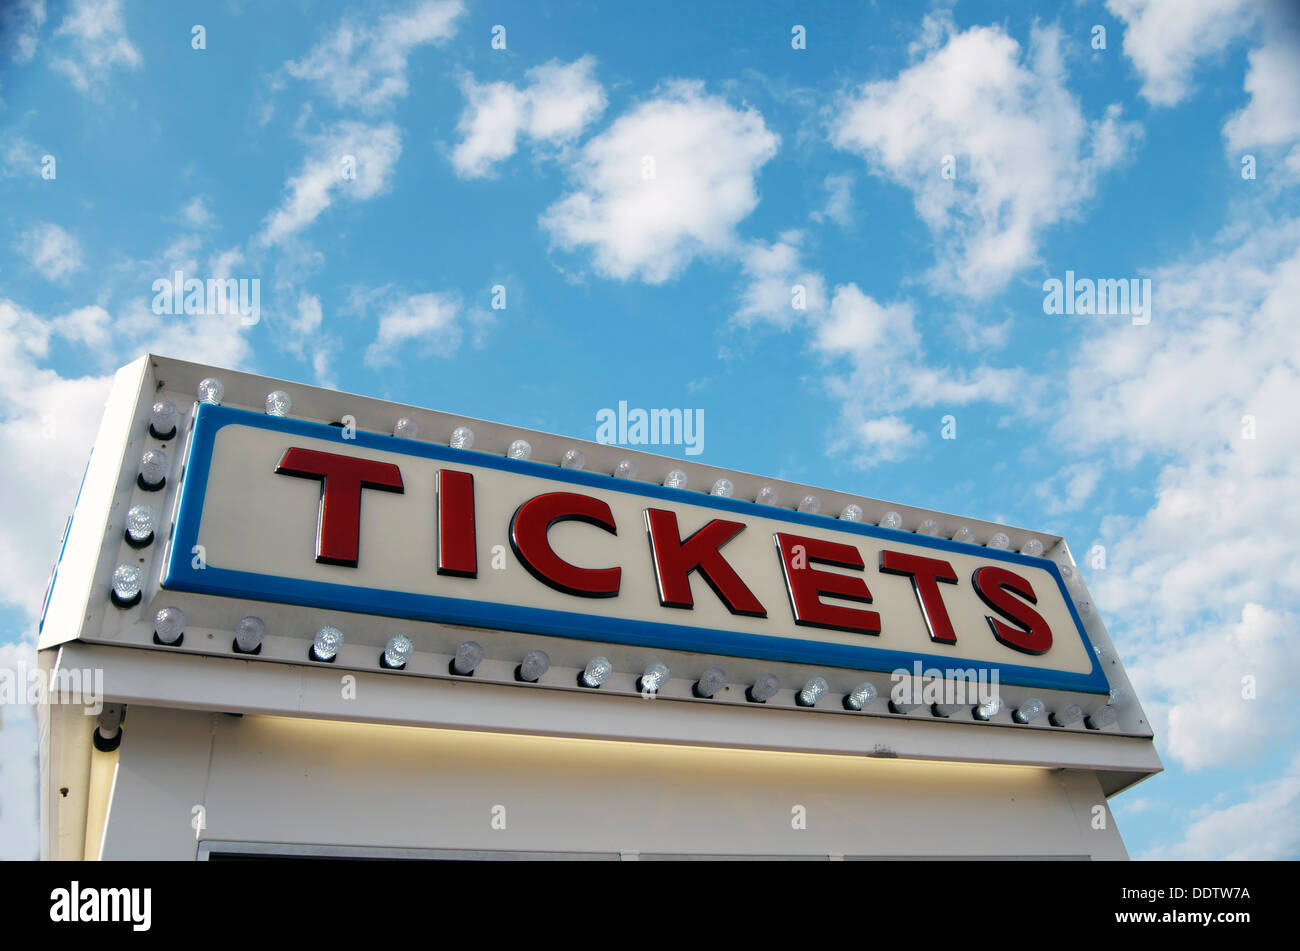 The word Tickets in red outlined with blue line and light bulbs against a blue sky with clouds. Stock Photo